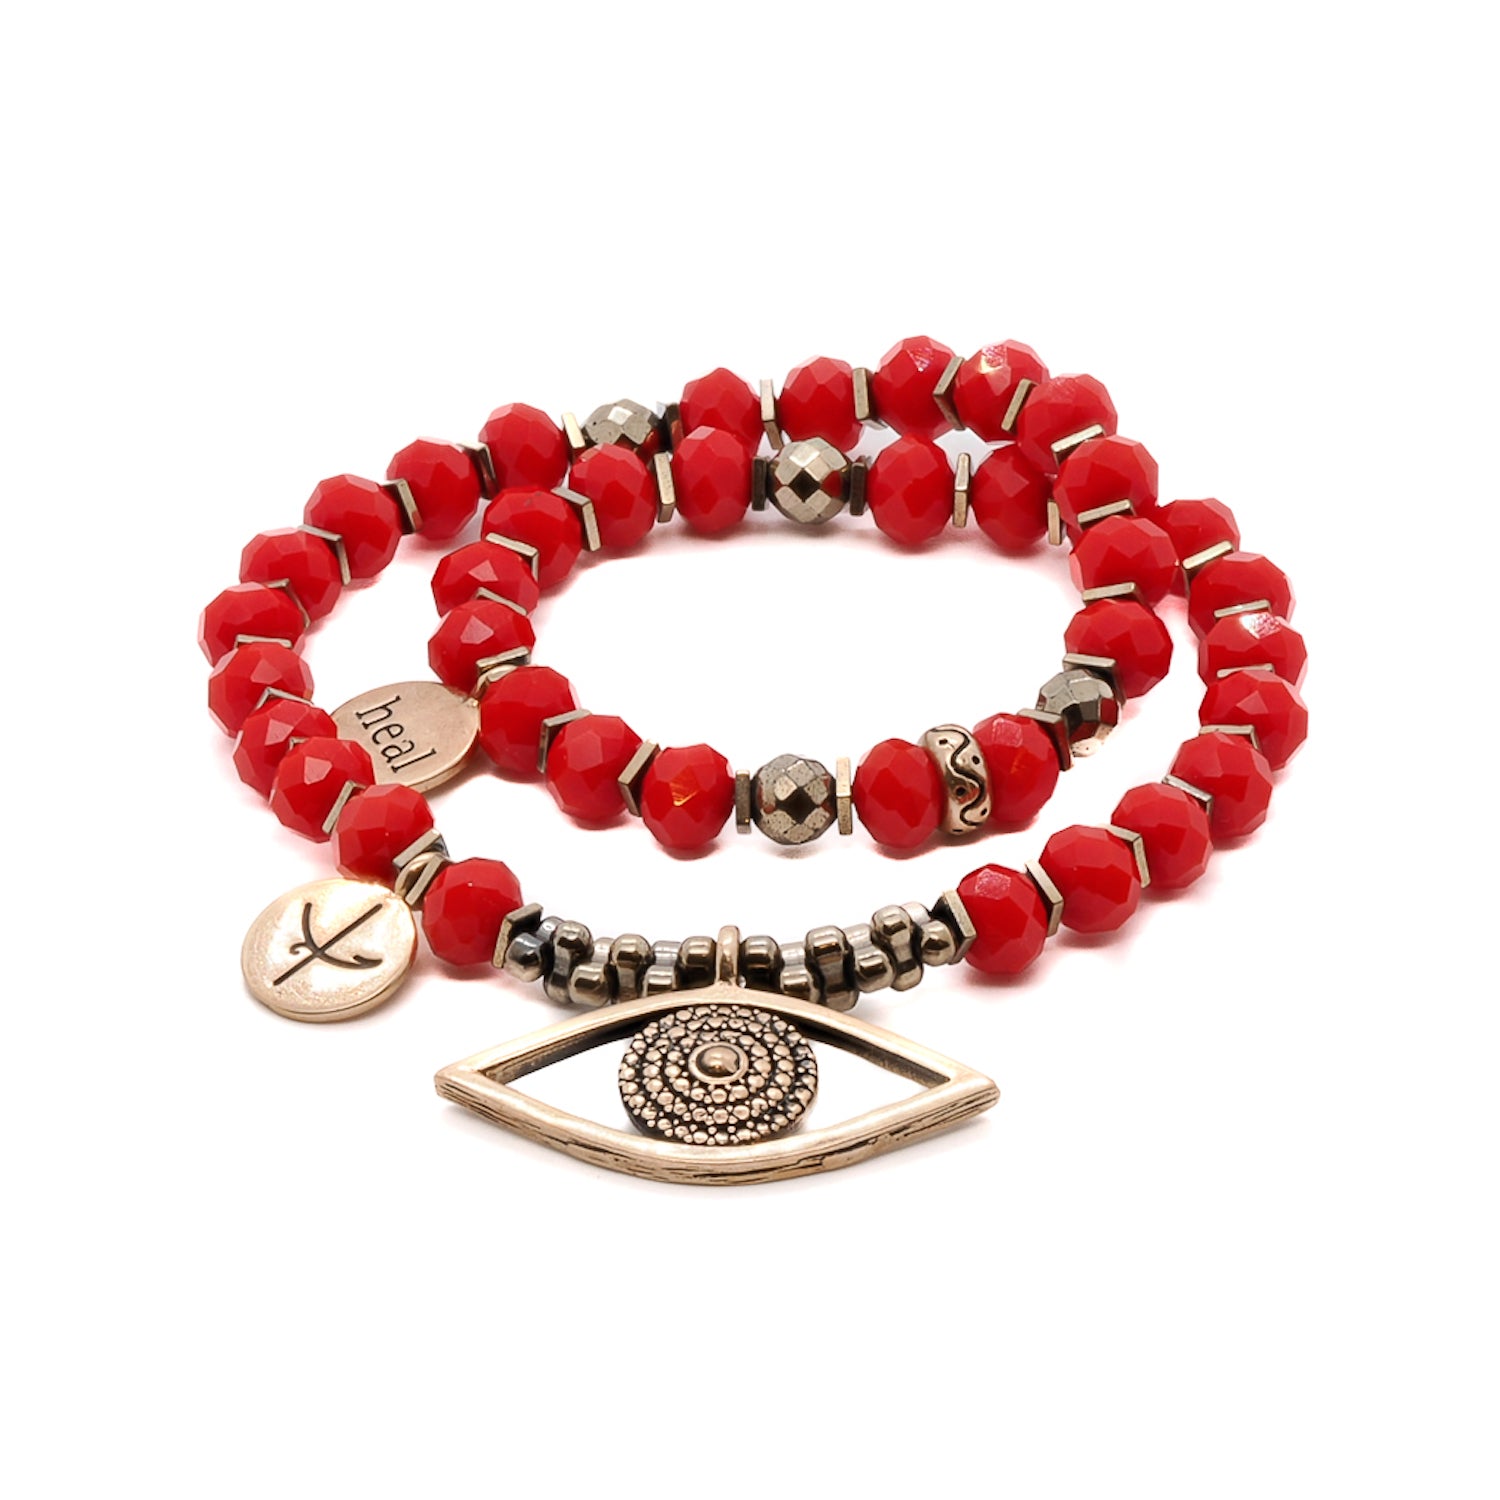 Christmas Evil Eye Bracelet: A double bracelet featuring powerful red color crystal beads and a handmade bronze Evil Eye pendant for protection and good luck.